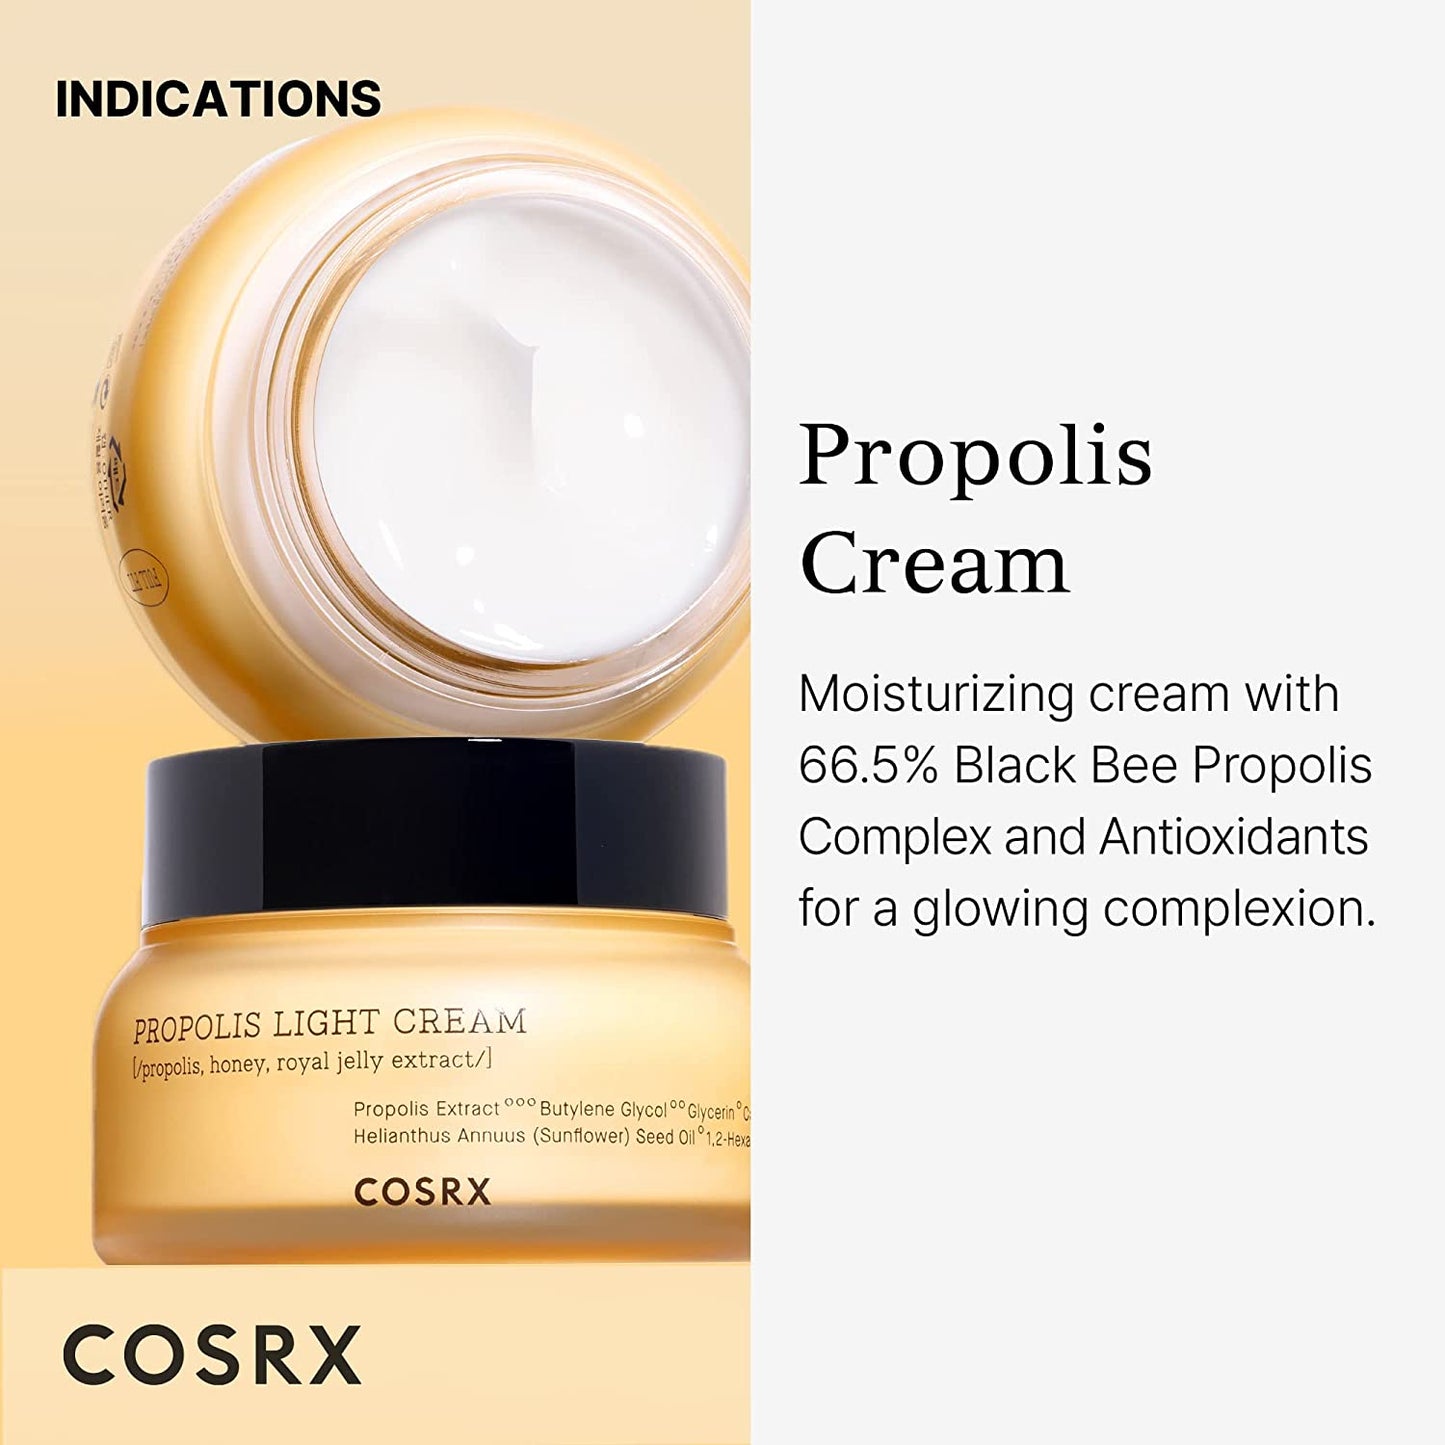 COSRX Propolis Cream, Hydrating Lightweight Face Moisturizer with 64.5% Propolis Extract, Nourish and Soften Dry Skin, 2.19 fl.oz / 65ml